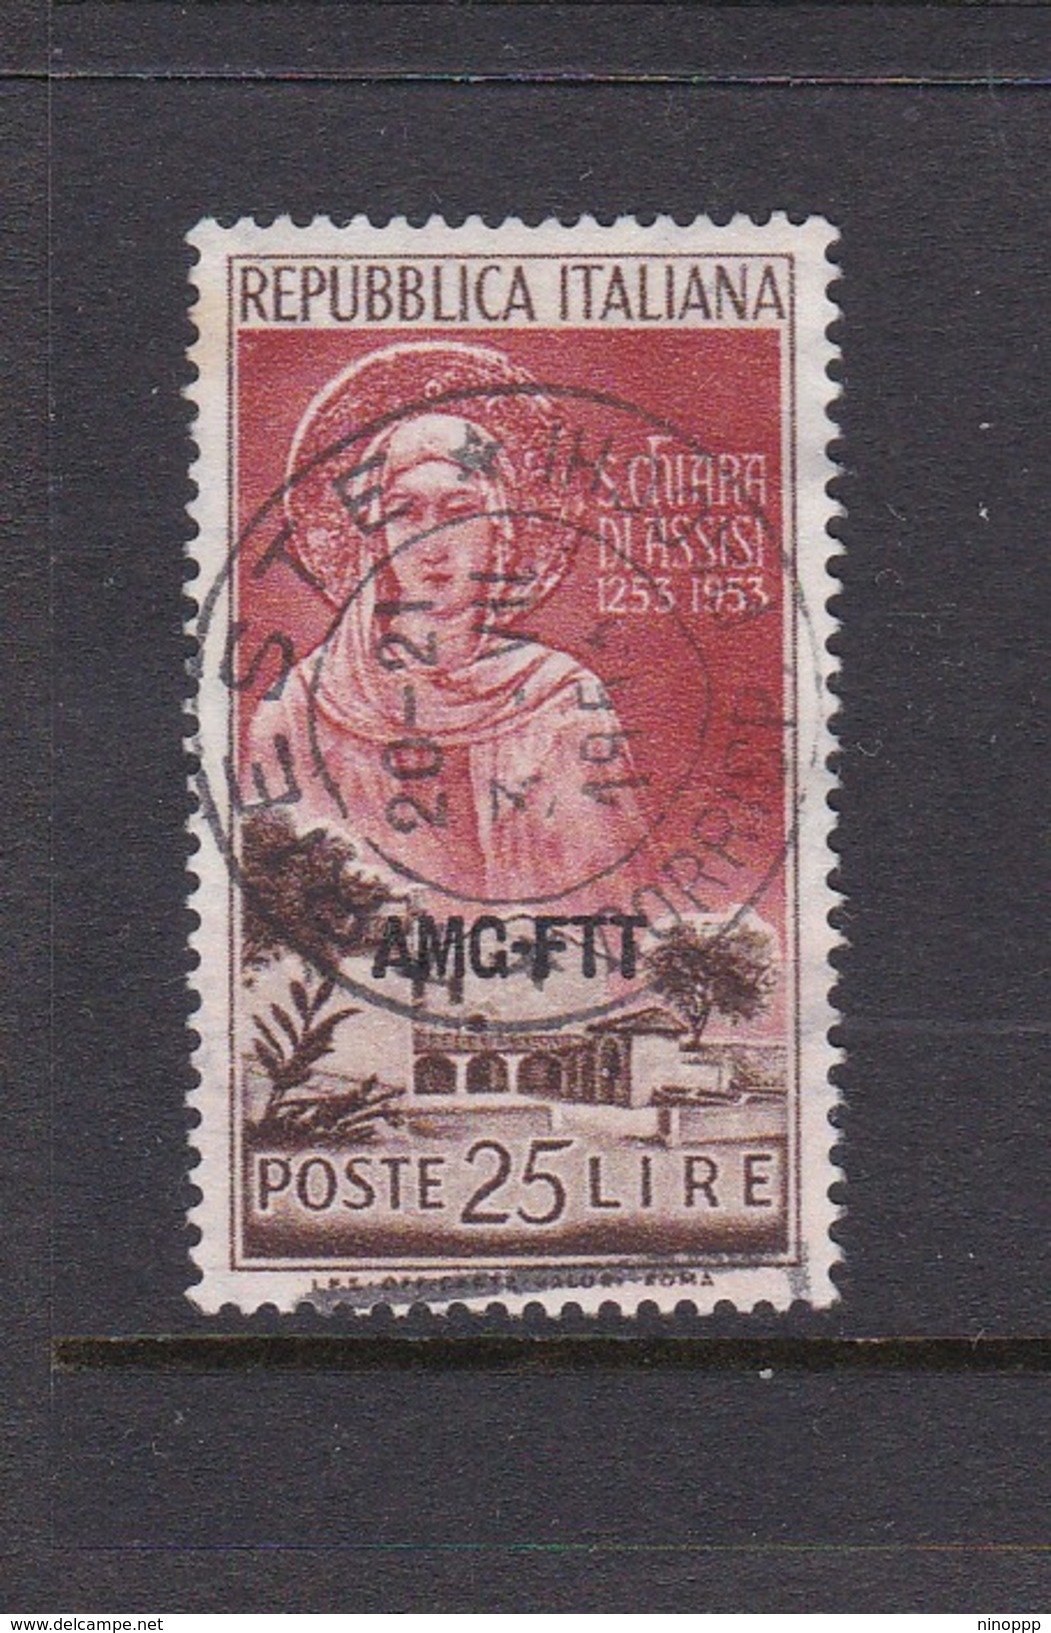 Trieste Allied Military Government S 177 1953 7th Death Centenary Of St Claire, Used - Oblitérés